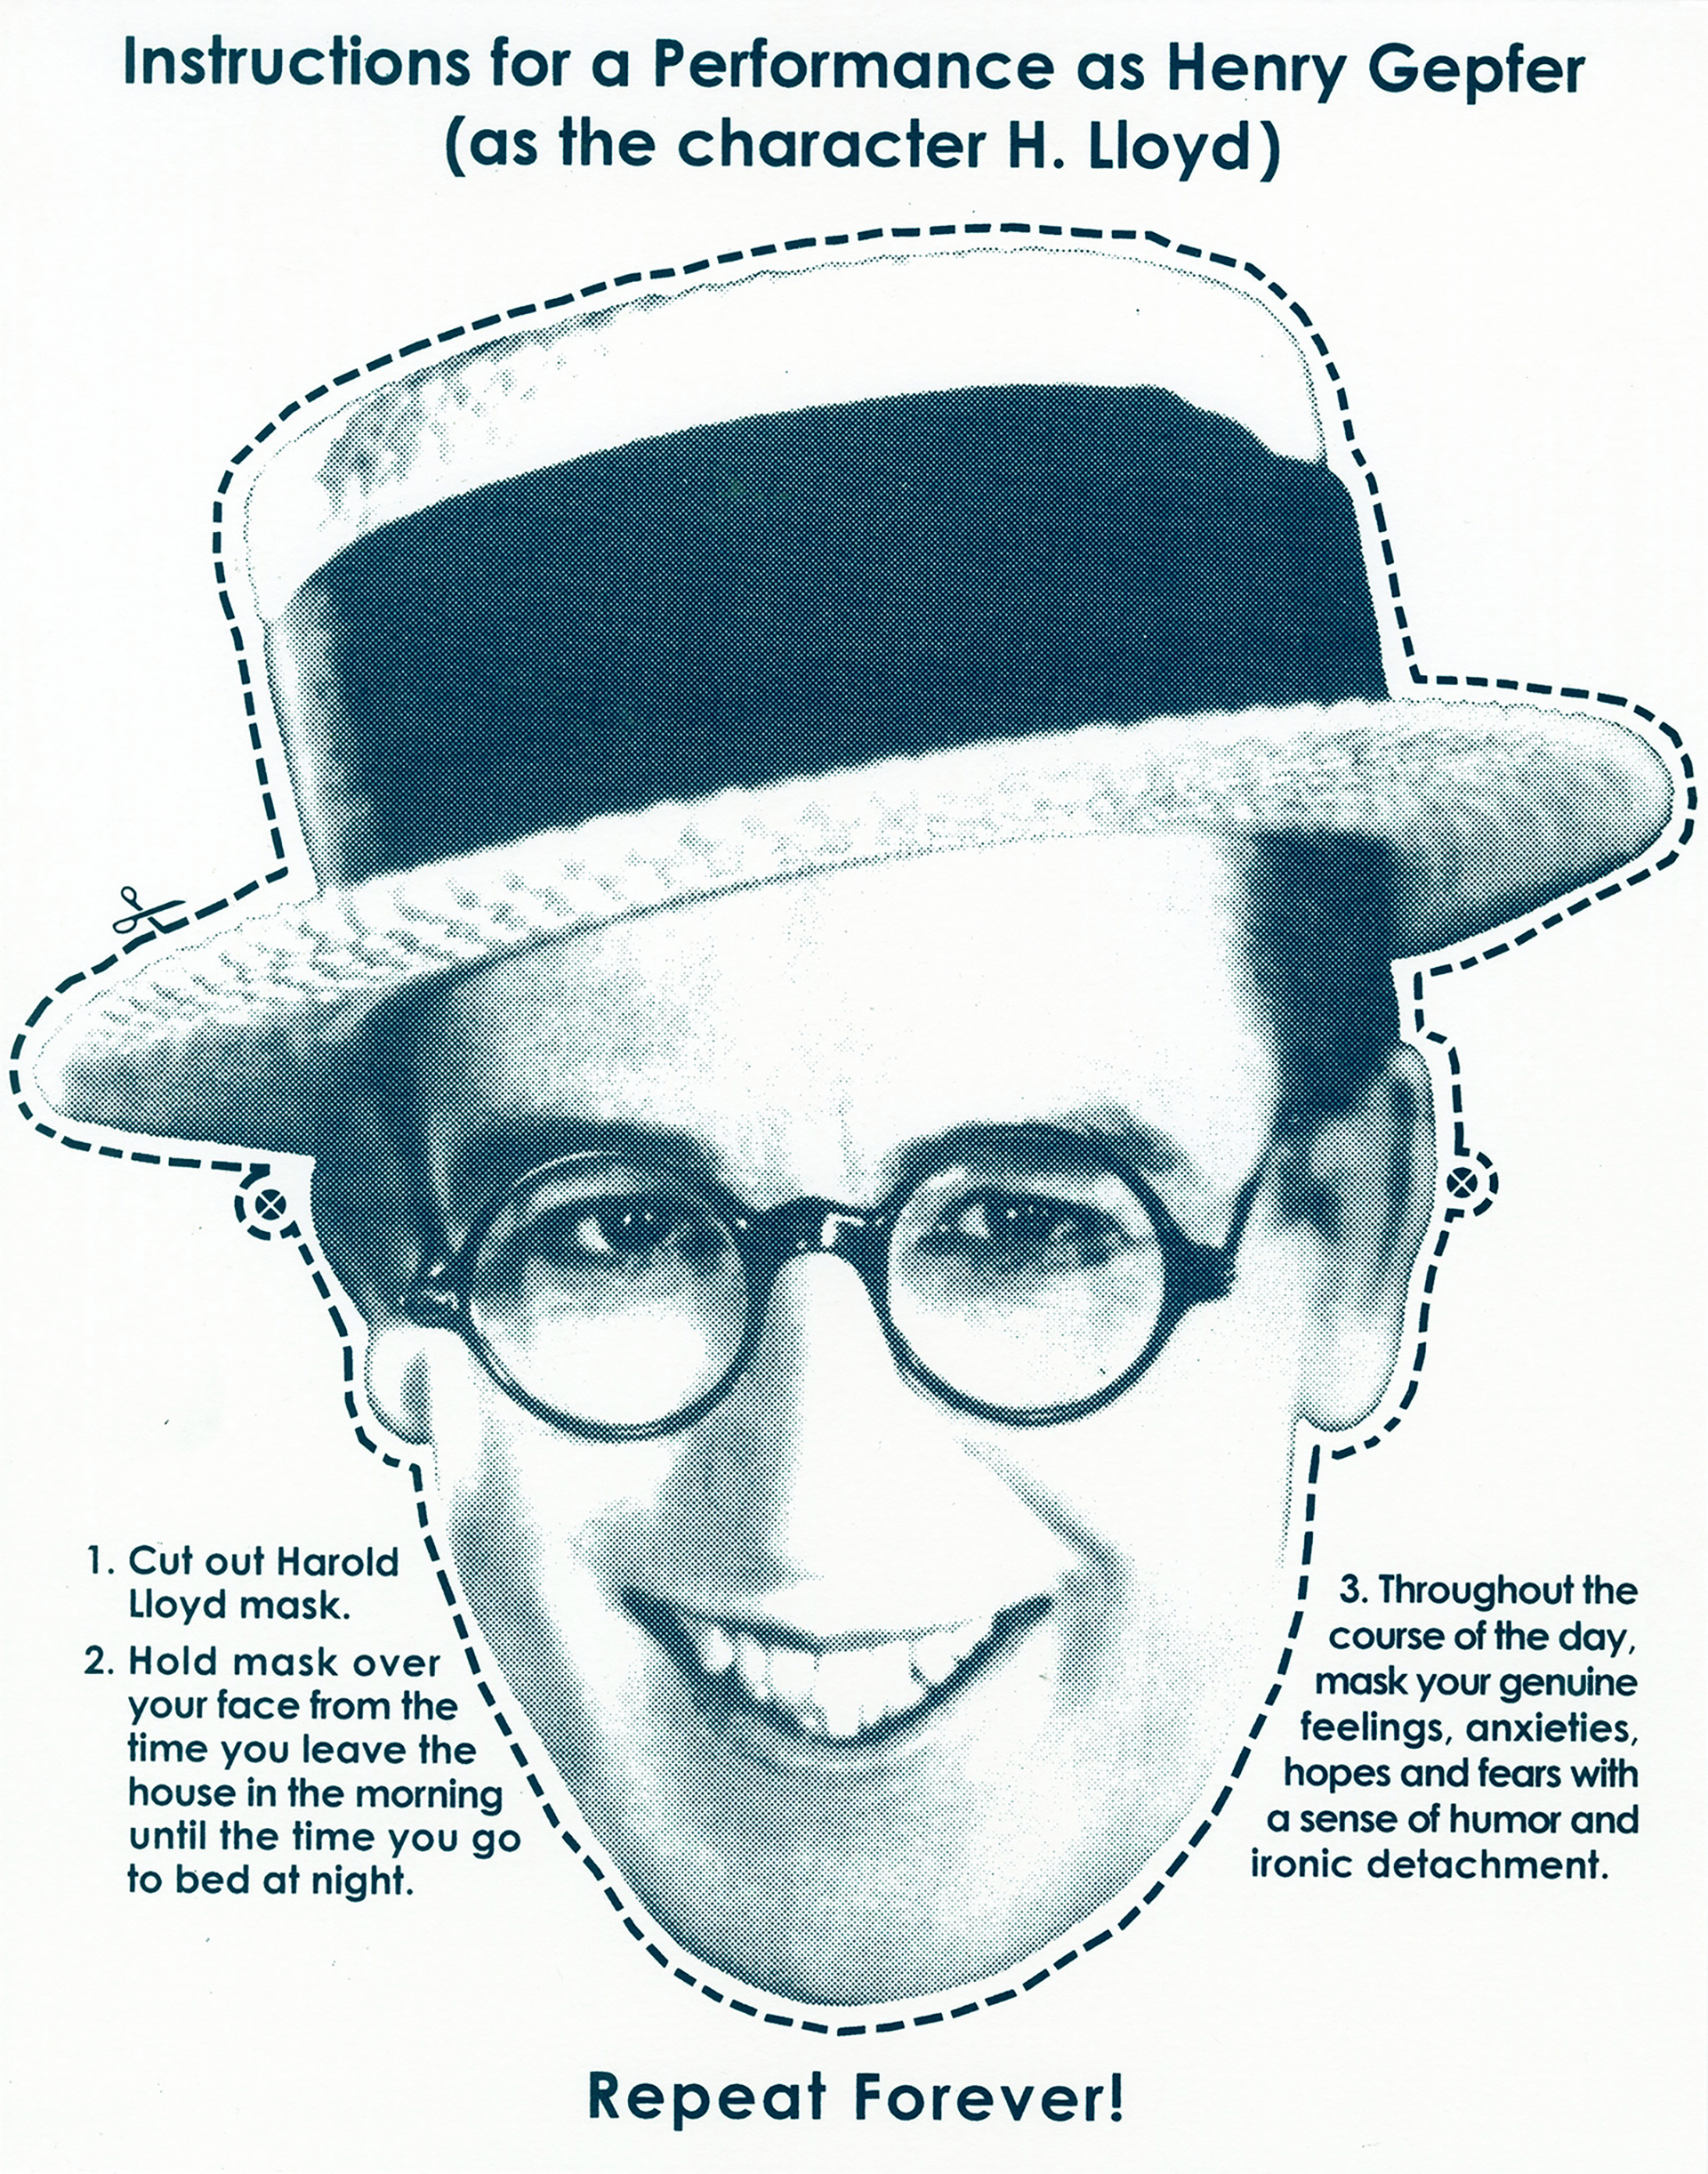 Screenprint of the silent film actor Harold Lloyd including instructions to cut out the face for use as a mask to disguise genuine feelings